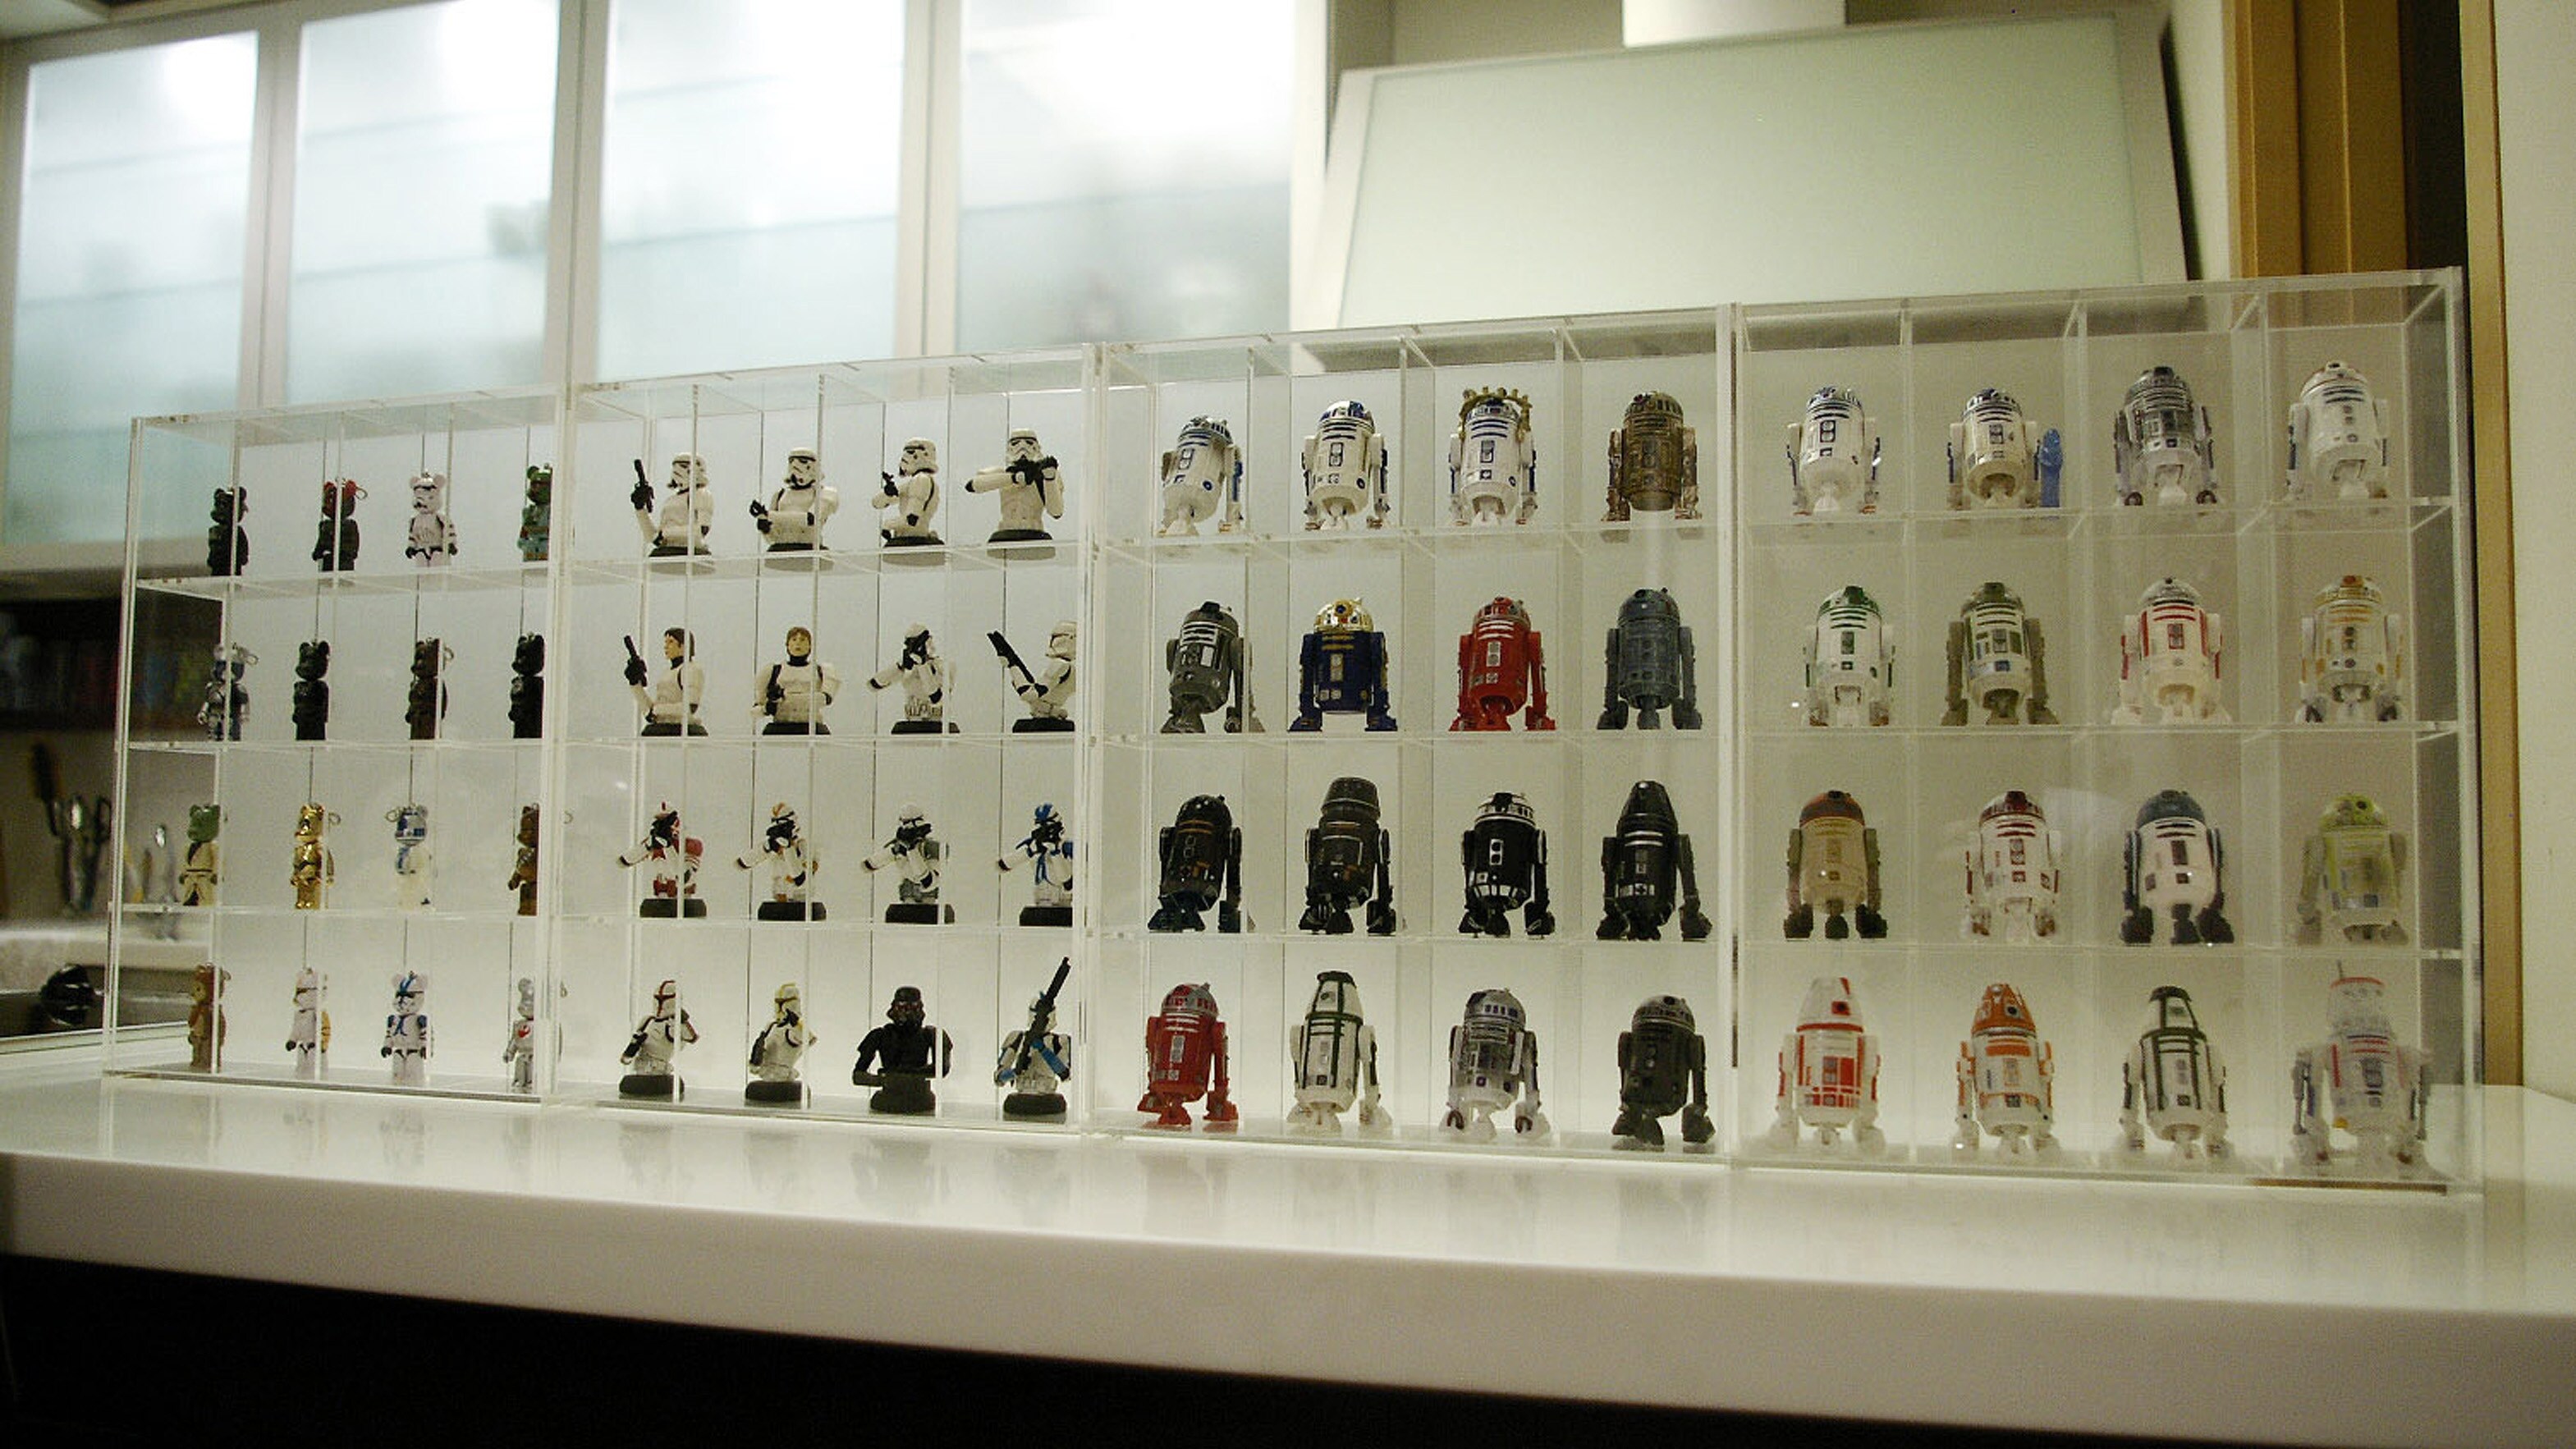 Cho Woong - Star Wars collection: Astromech droids and Stormtrooper collectibles